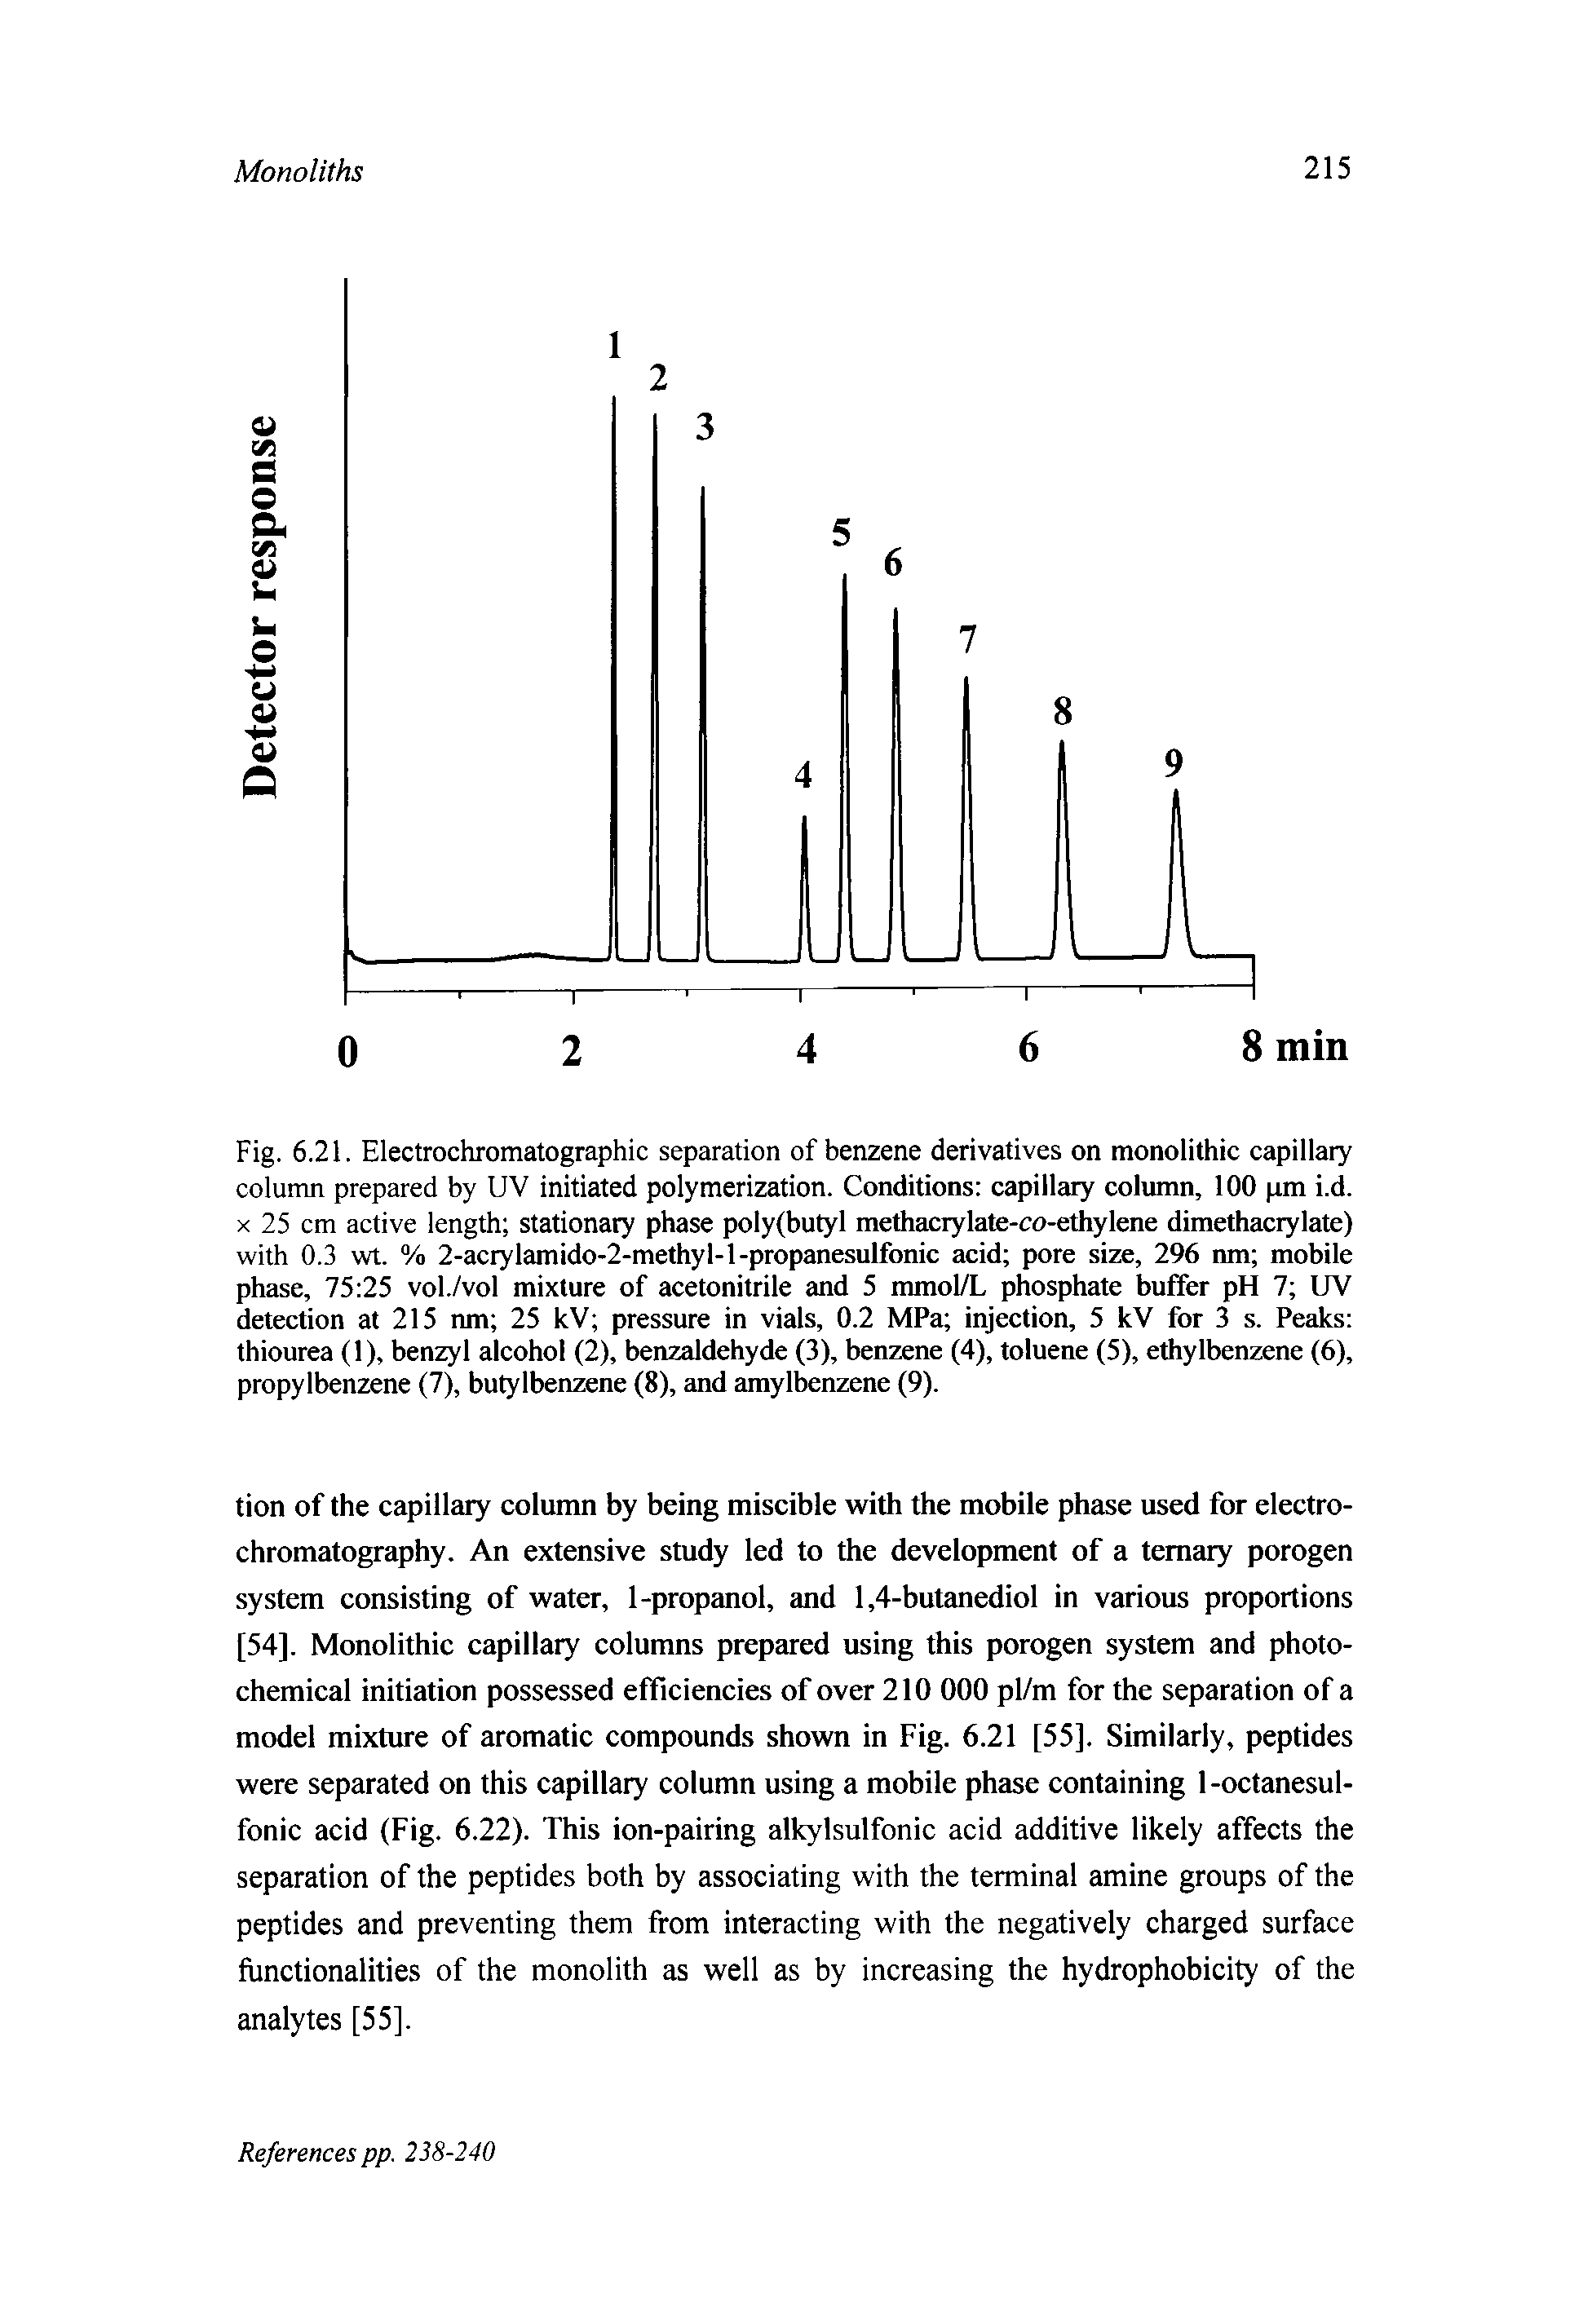 Fig. 6.21. Electrochromatographic separation of benzene derivatives on monolithic capillary column prepared by UV initiated polymerization. Conditions capillary column, 100 pm i.d. x 25 cm active length stationary phase poly(butyl methacrylate-co-ethylene dimethaciylate) with 0.3 wt. % 2-acrylamido-2-methyl-l-propanesulfonic acid pore size, 296 nm mobile phase, 75 25 vol./vol mixture of acetonitrile and 5 mmol/L phosphate buffer pH 7 UV detection at 215 nm 25 kV pressure in vials, 0.2 MPa injection, 5 kV for 3 s. Peaks thiourea (1), benzyl alcohol (2), benzaldehyde (3), benzene (4), toluene (5), ethylbenzene (6), propylbenzene (7), butylbenzene (8), and amylbenzene (9).